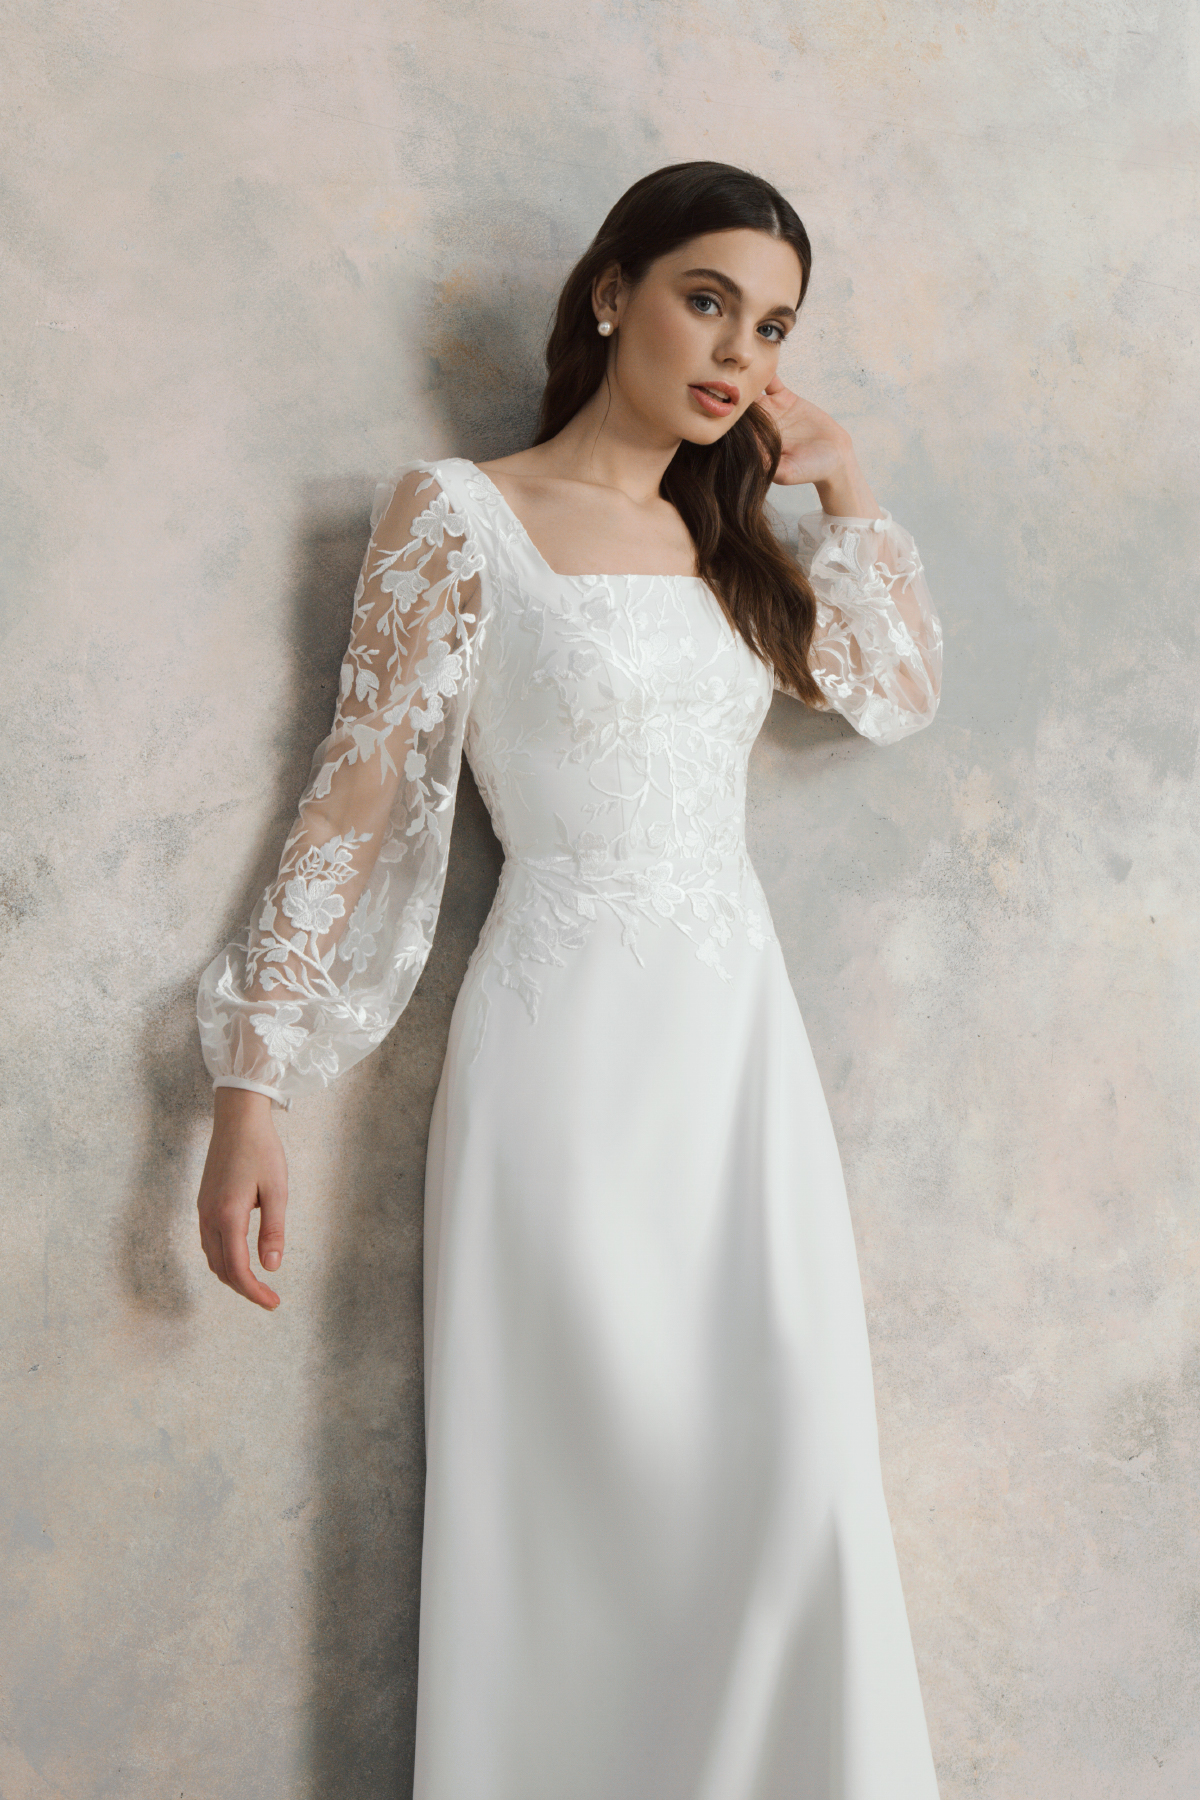 Square neck wedding dress with puff sleeves - Michaela • Piondress